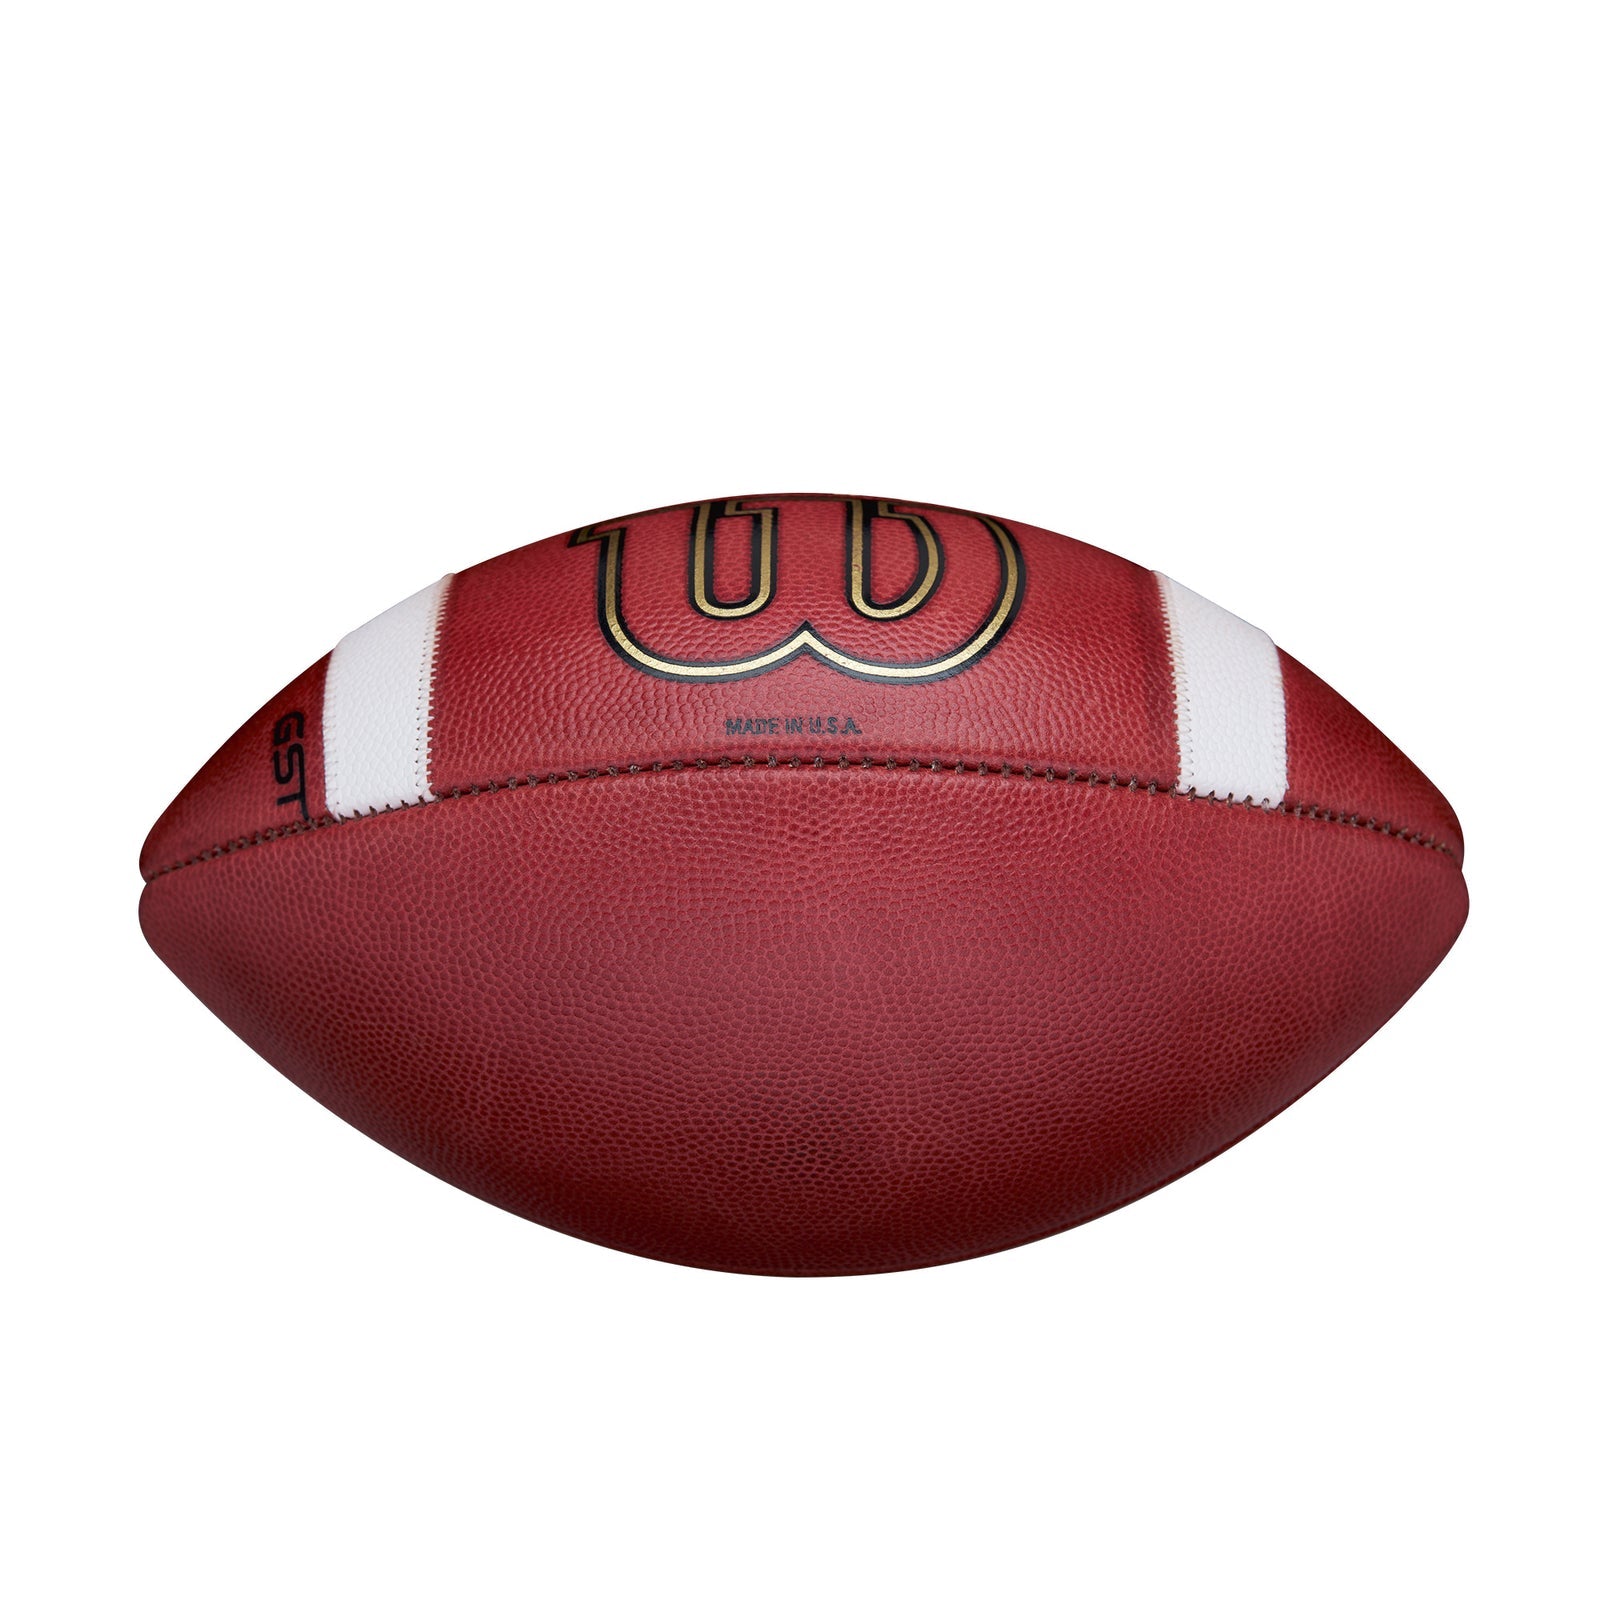 Wilson 1002 GST Leather Football - Blem - Official Size